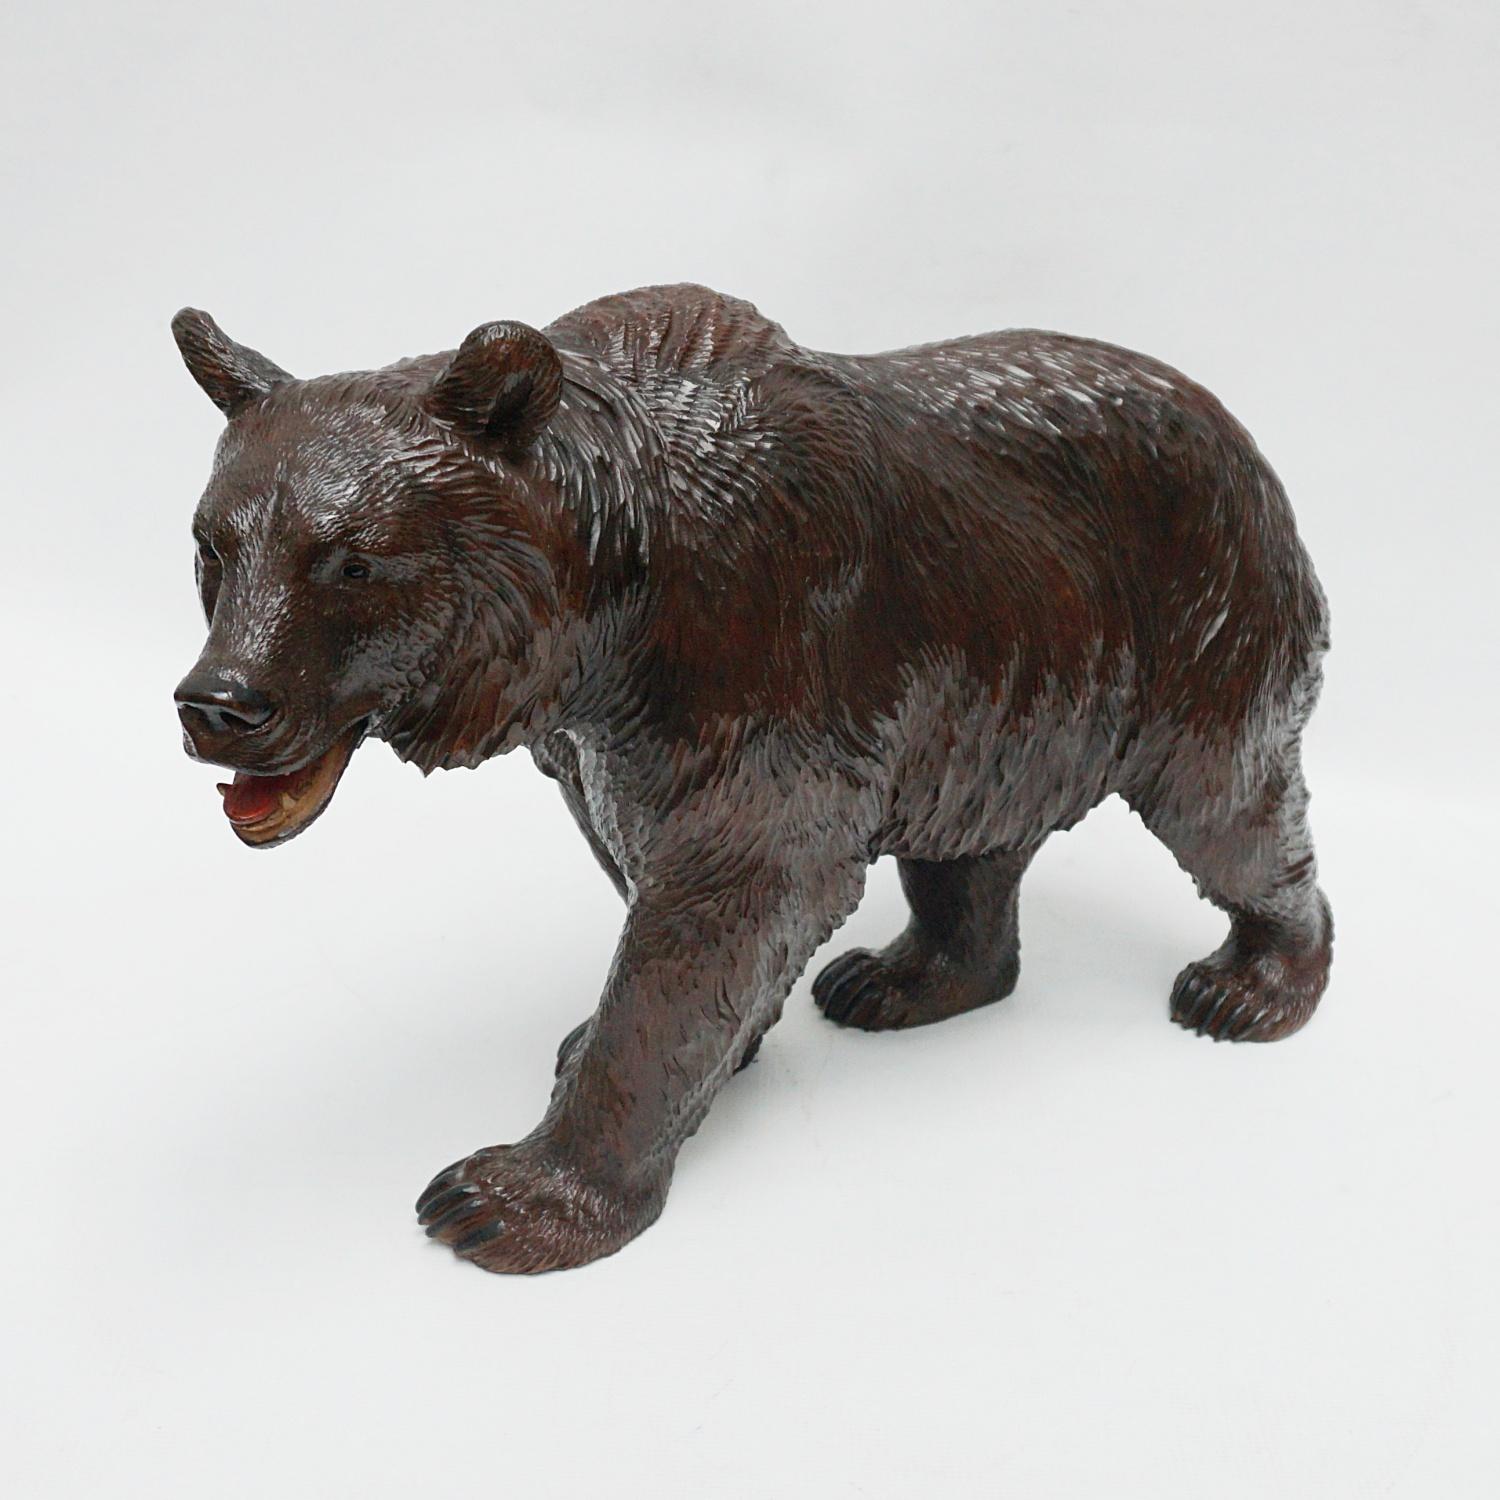 A Black Forest carved bear. Fine hand carved detail with original glass eyes. Linden wood.

Dimensions: H 27.5cm W 44cm D 14cm 

Origin: Swiss

Date: Circa 1890.